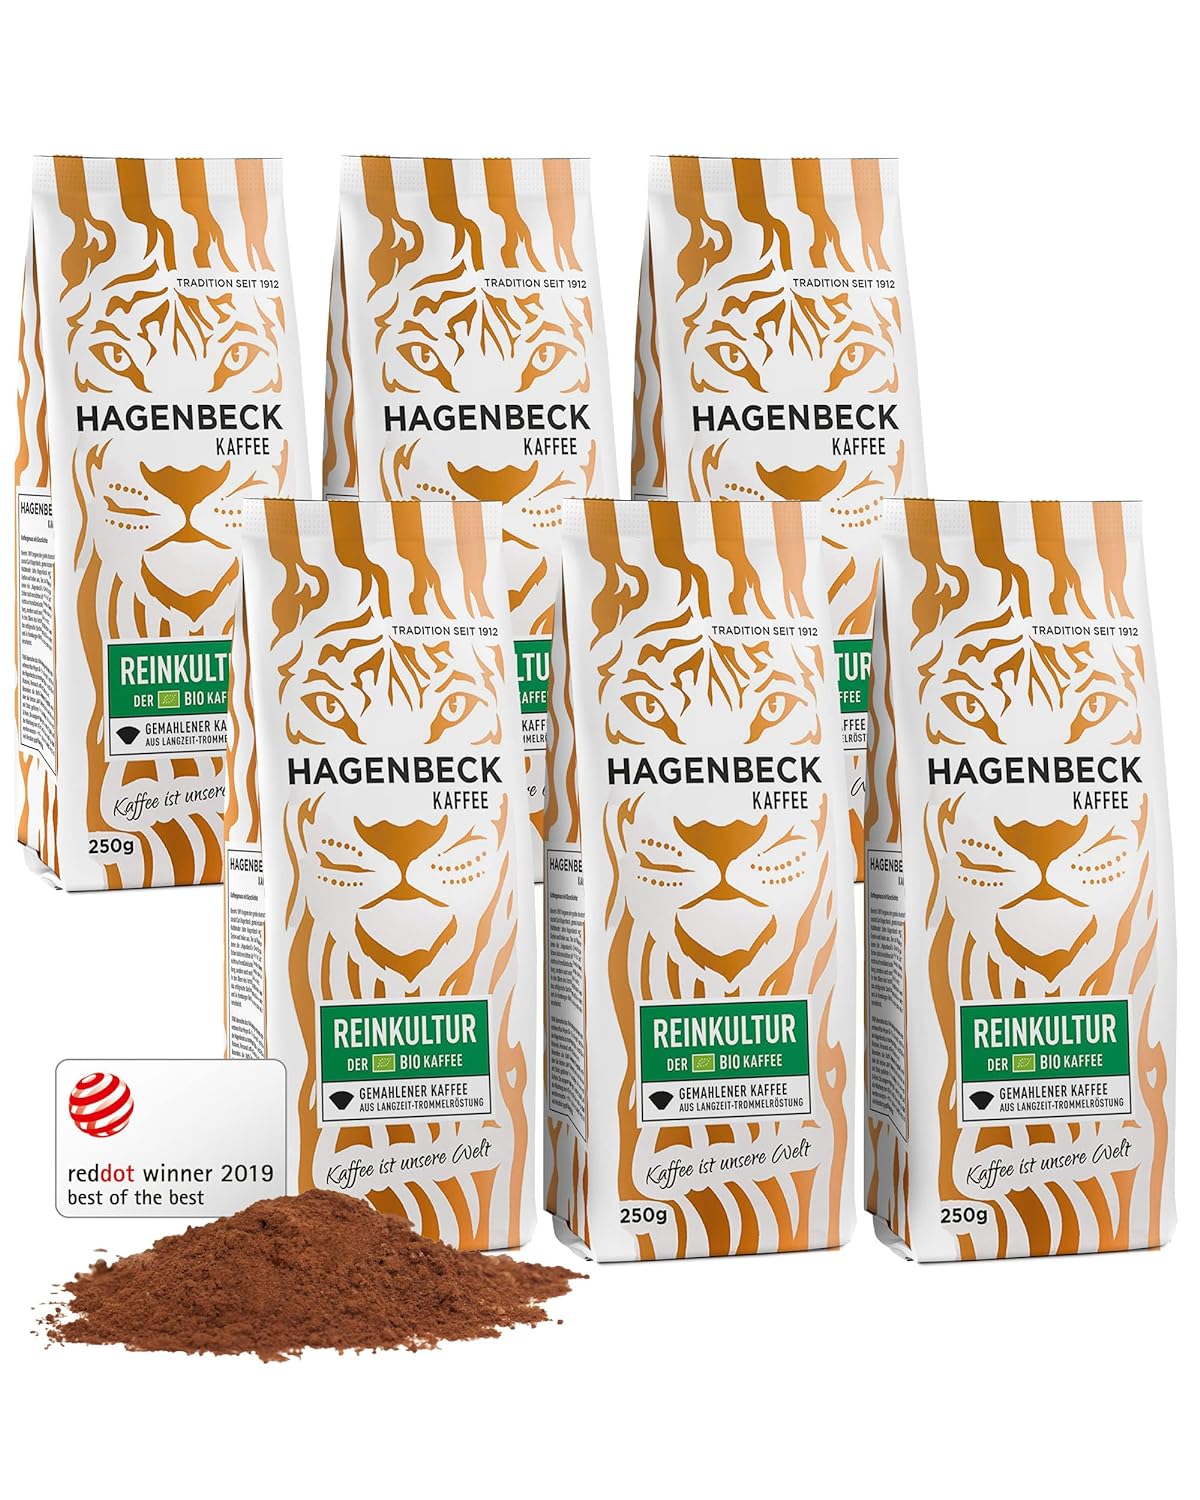 Hagenbeck Organic Pure Culture 6x250g (1.5kg) | Organic Coffee Ground & Classic Aromatic | Moderate Intensity | Ground coffee from German roasting | 100% Arabica blend made from organic coffee beans
